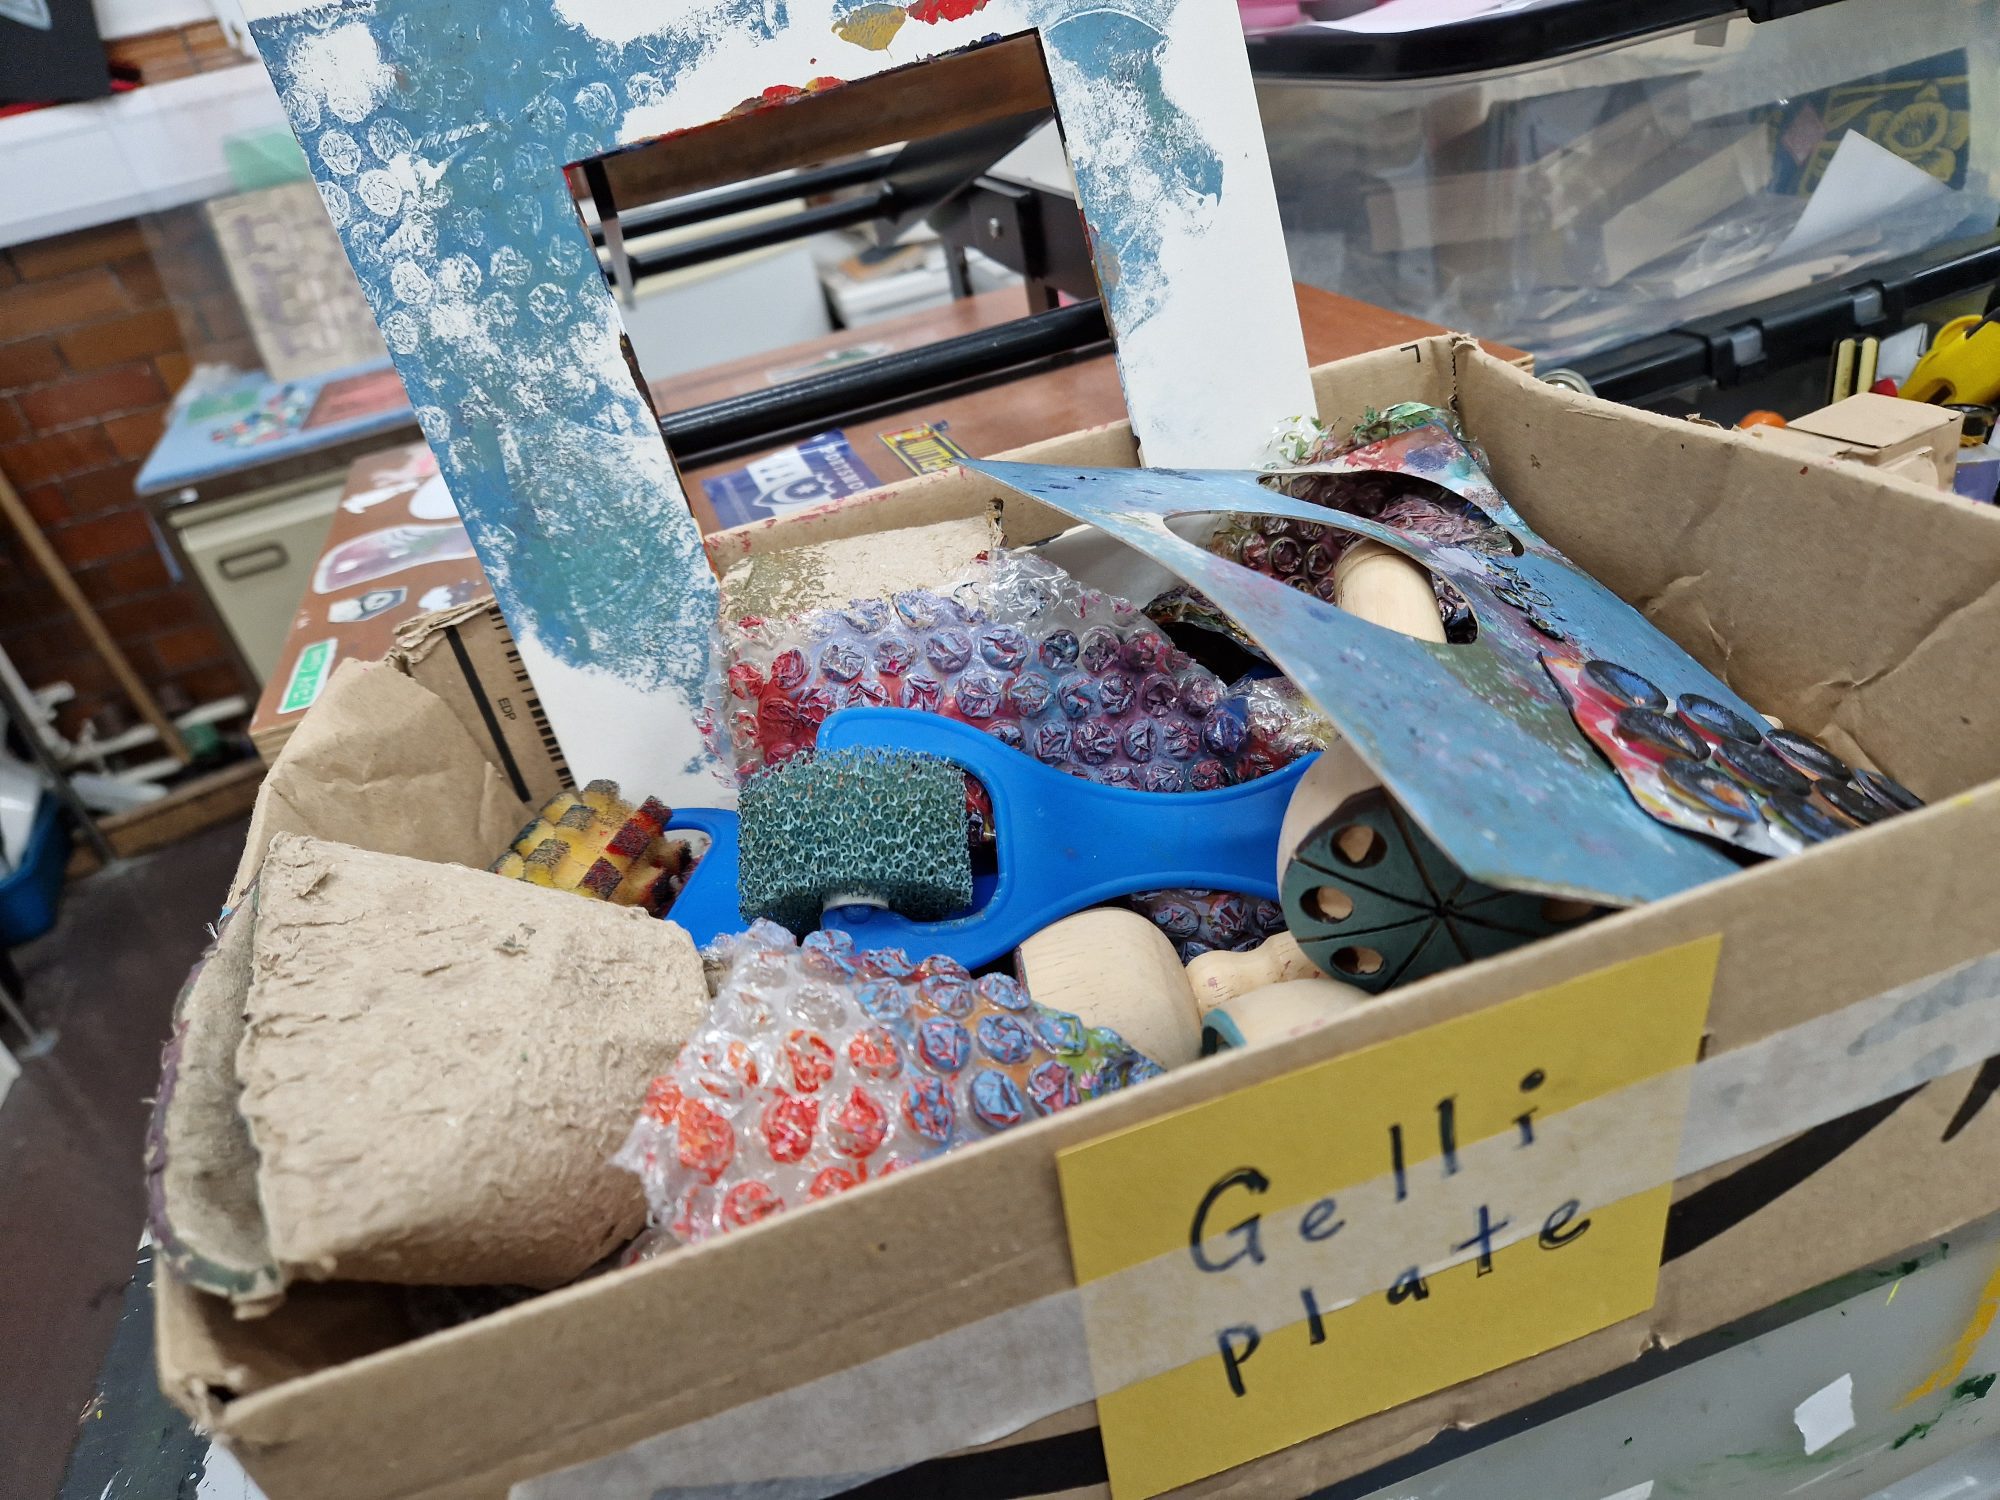 Box of supplies for gelli plate printing